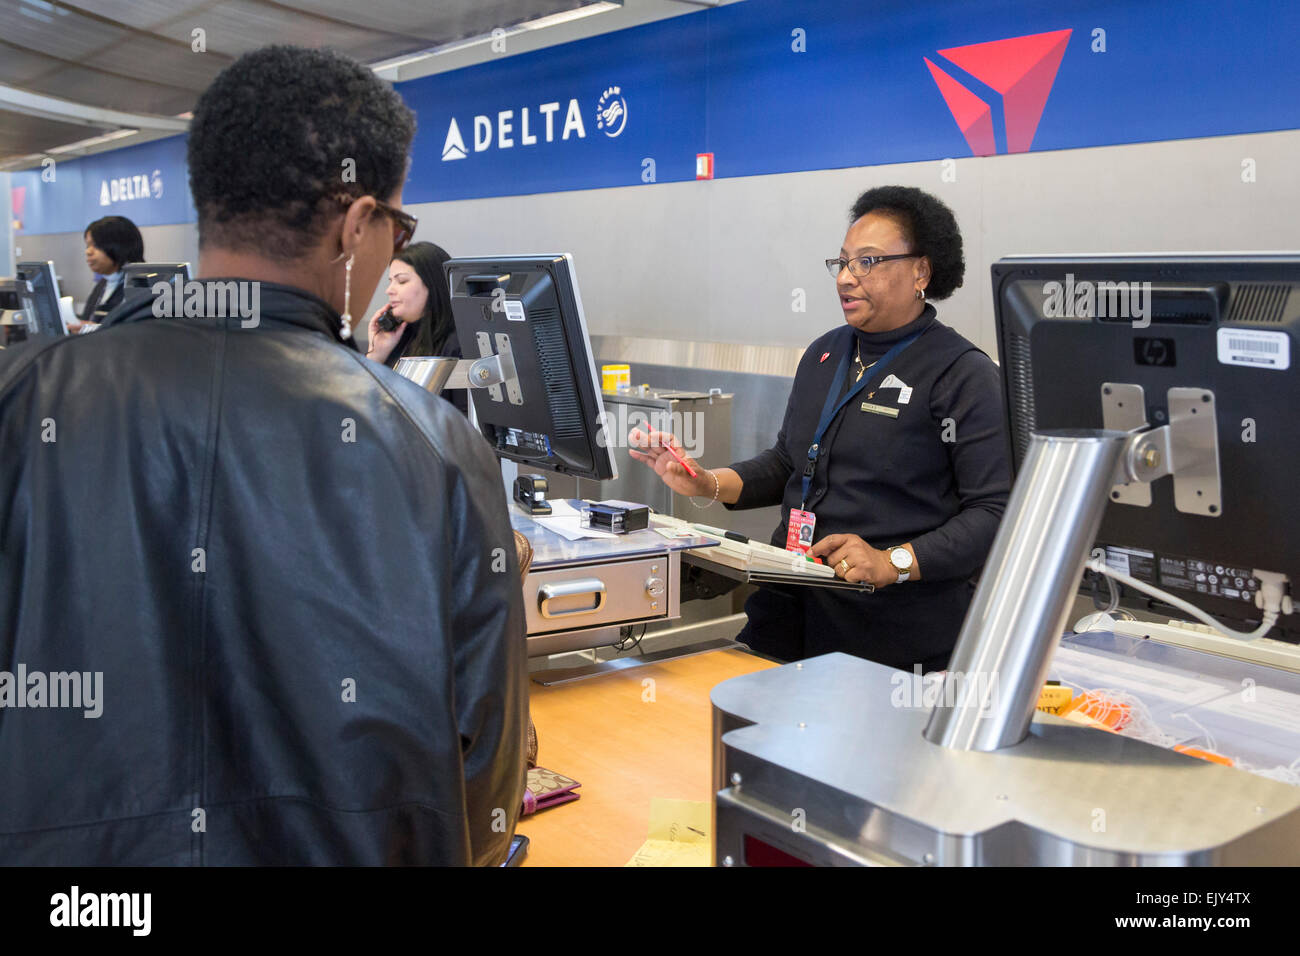 Romulus, Michigan - A Delta Air Lines ticket agent checks in a passenger at Detroit Metro Airport Stock Photo